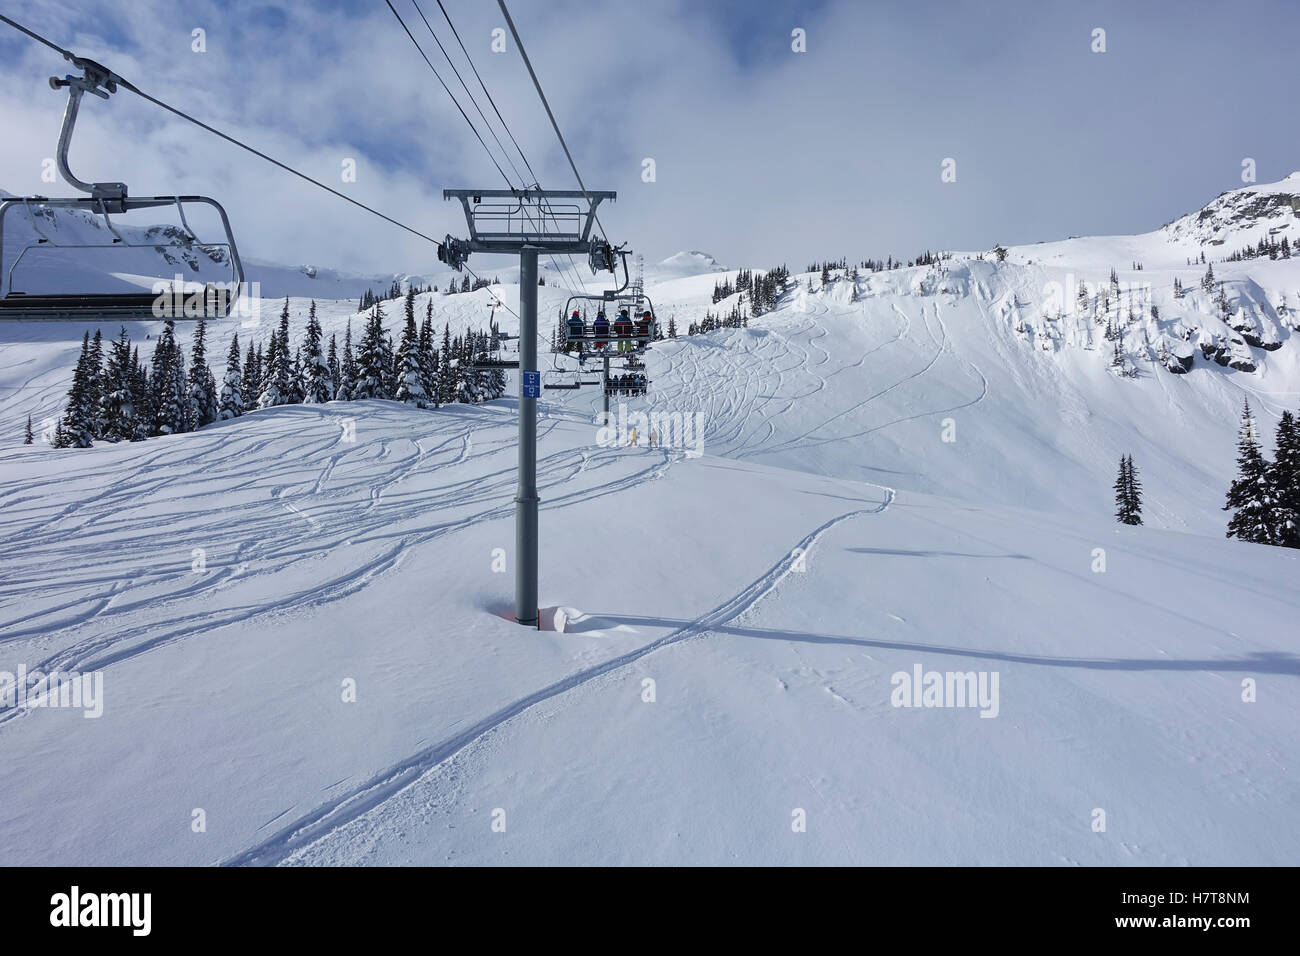 Going up on the Harmony Chairlift to ski hill; Whistler, British Columbia, Canada Stock Photo